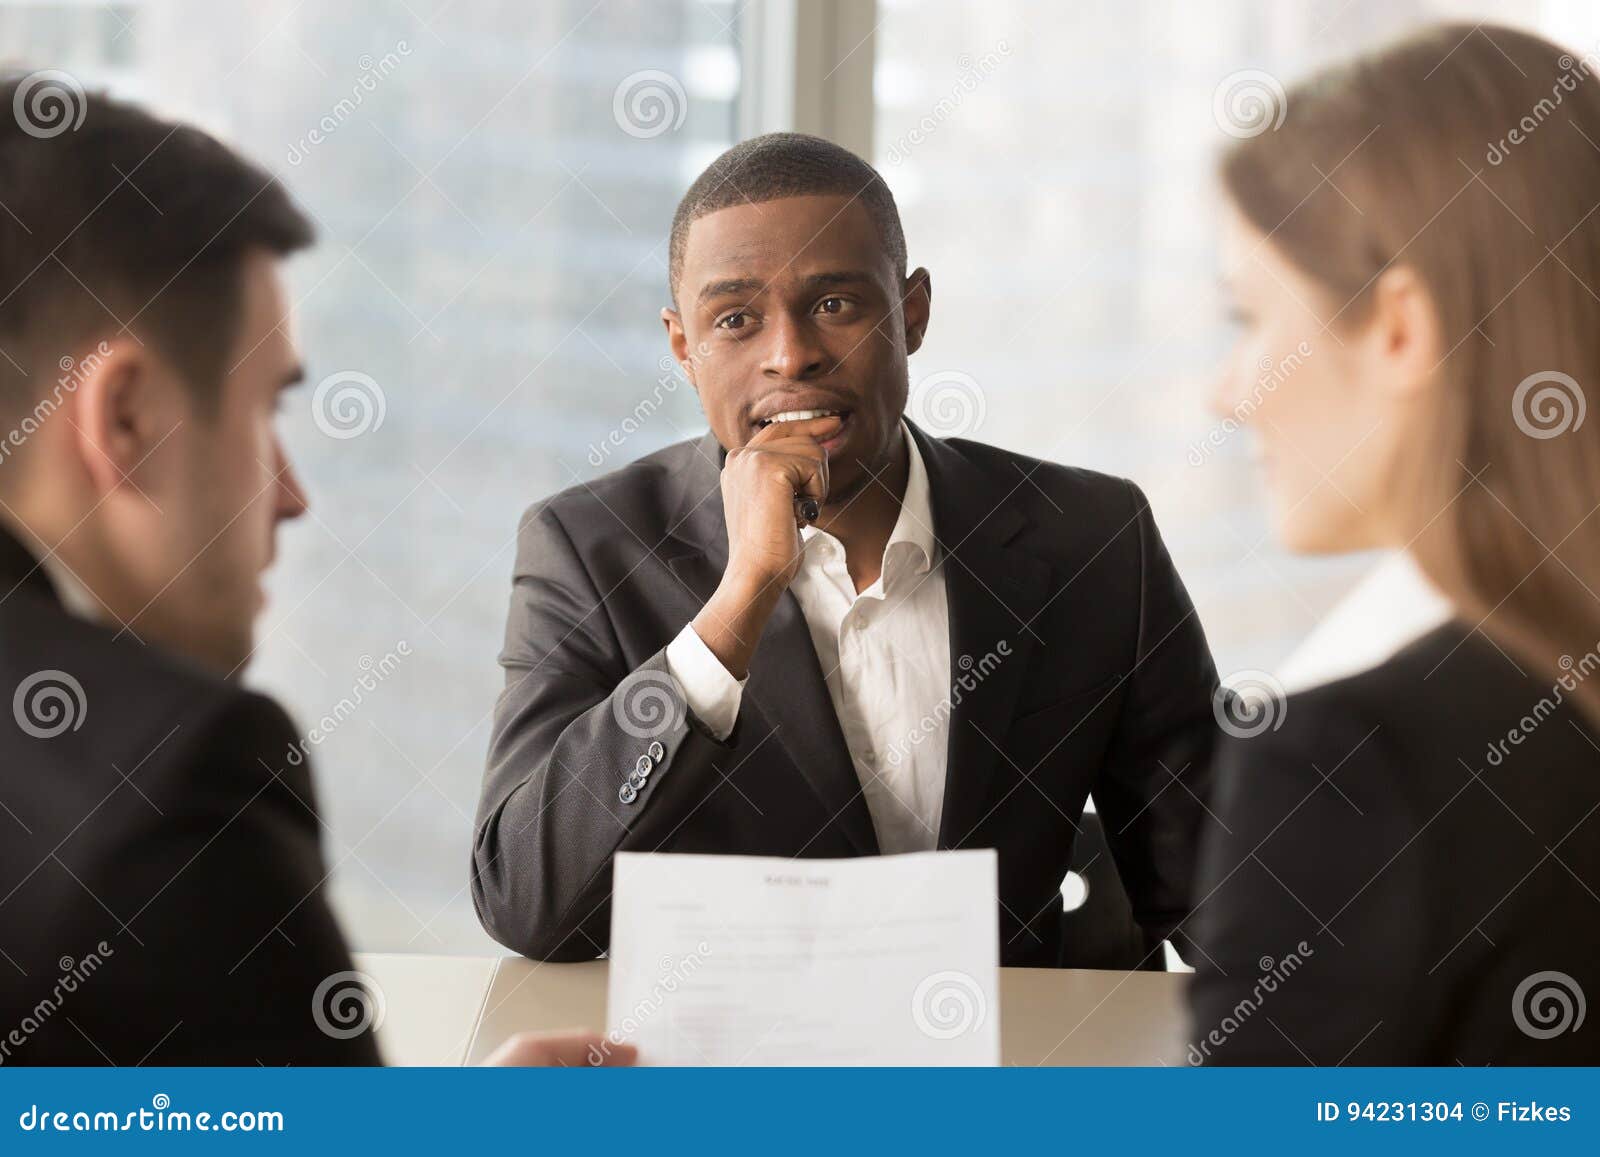 nervous worried unhired african-american job applicant waiting f